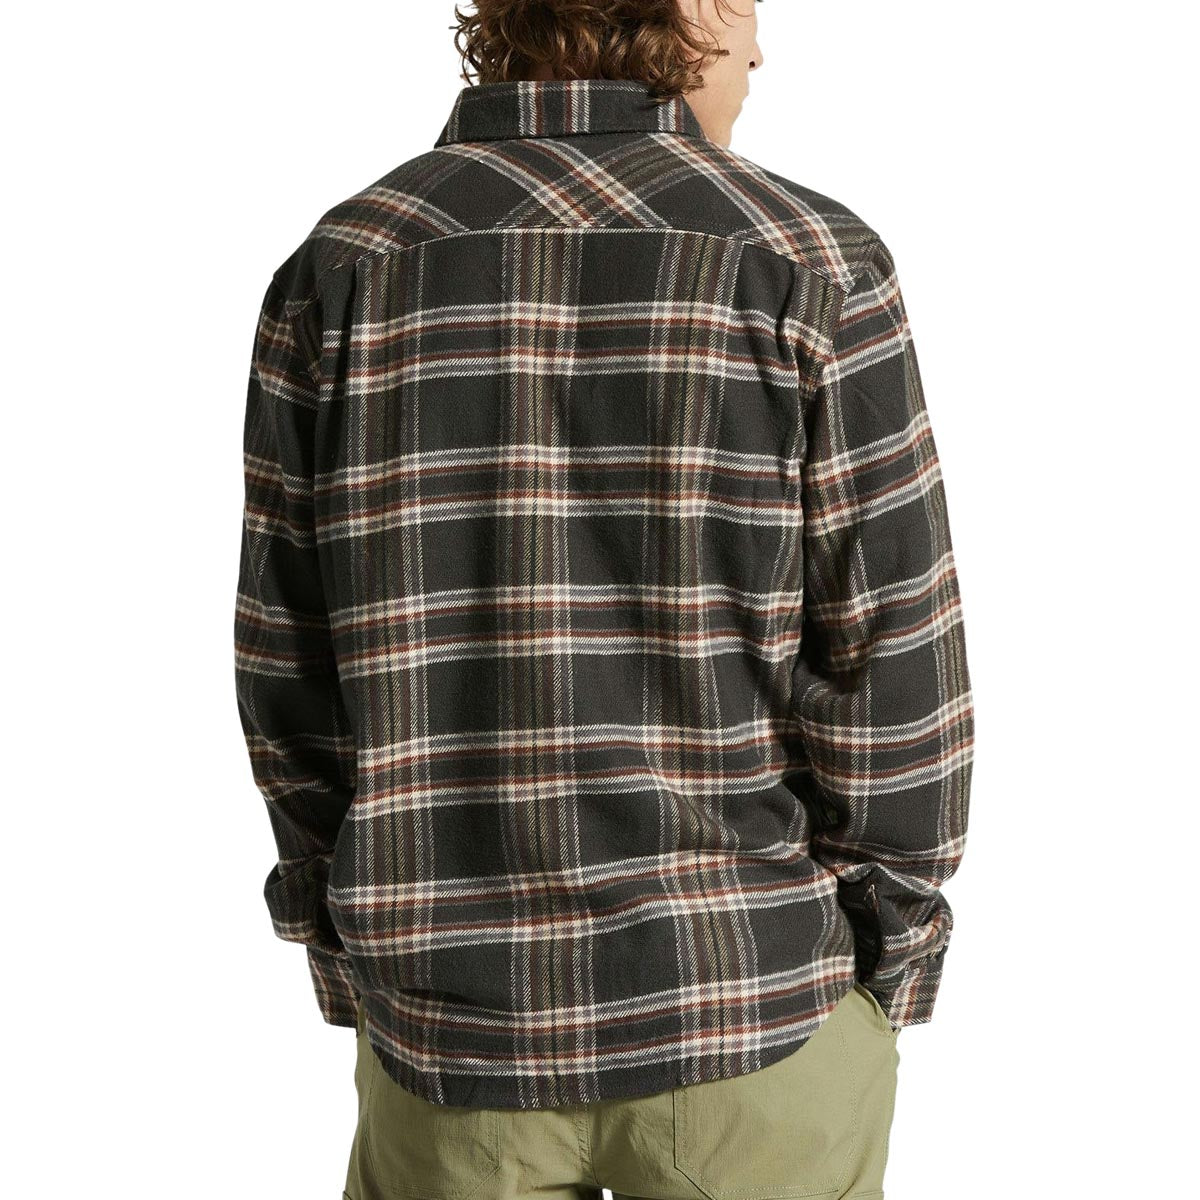 Brixton Bowery Flannel Long Sleeve Shirt - Black/Charcoal/Off White image 2